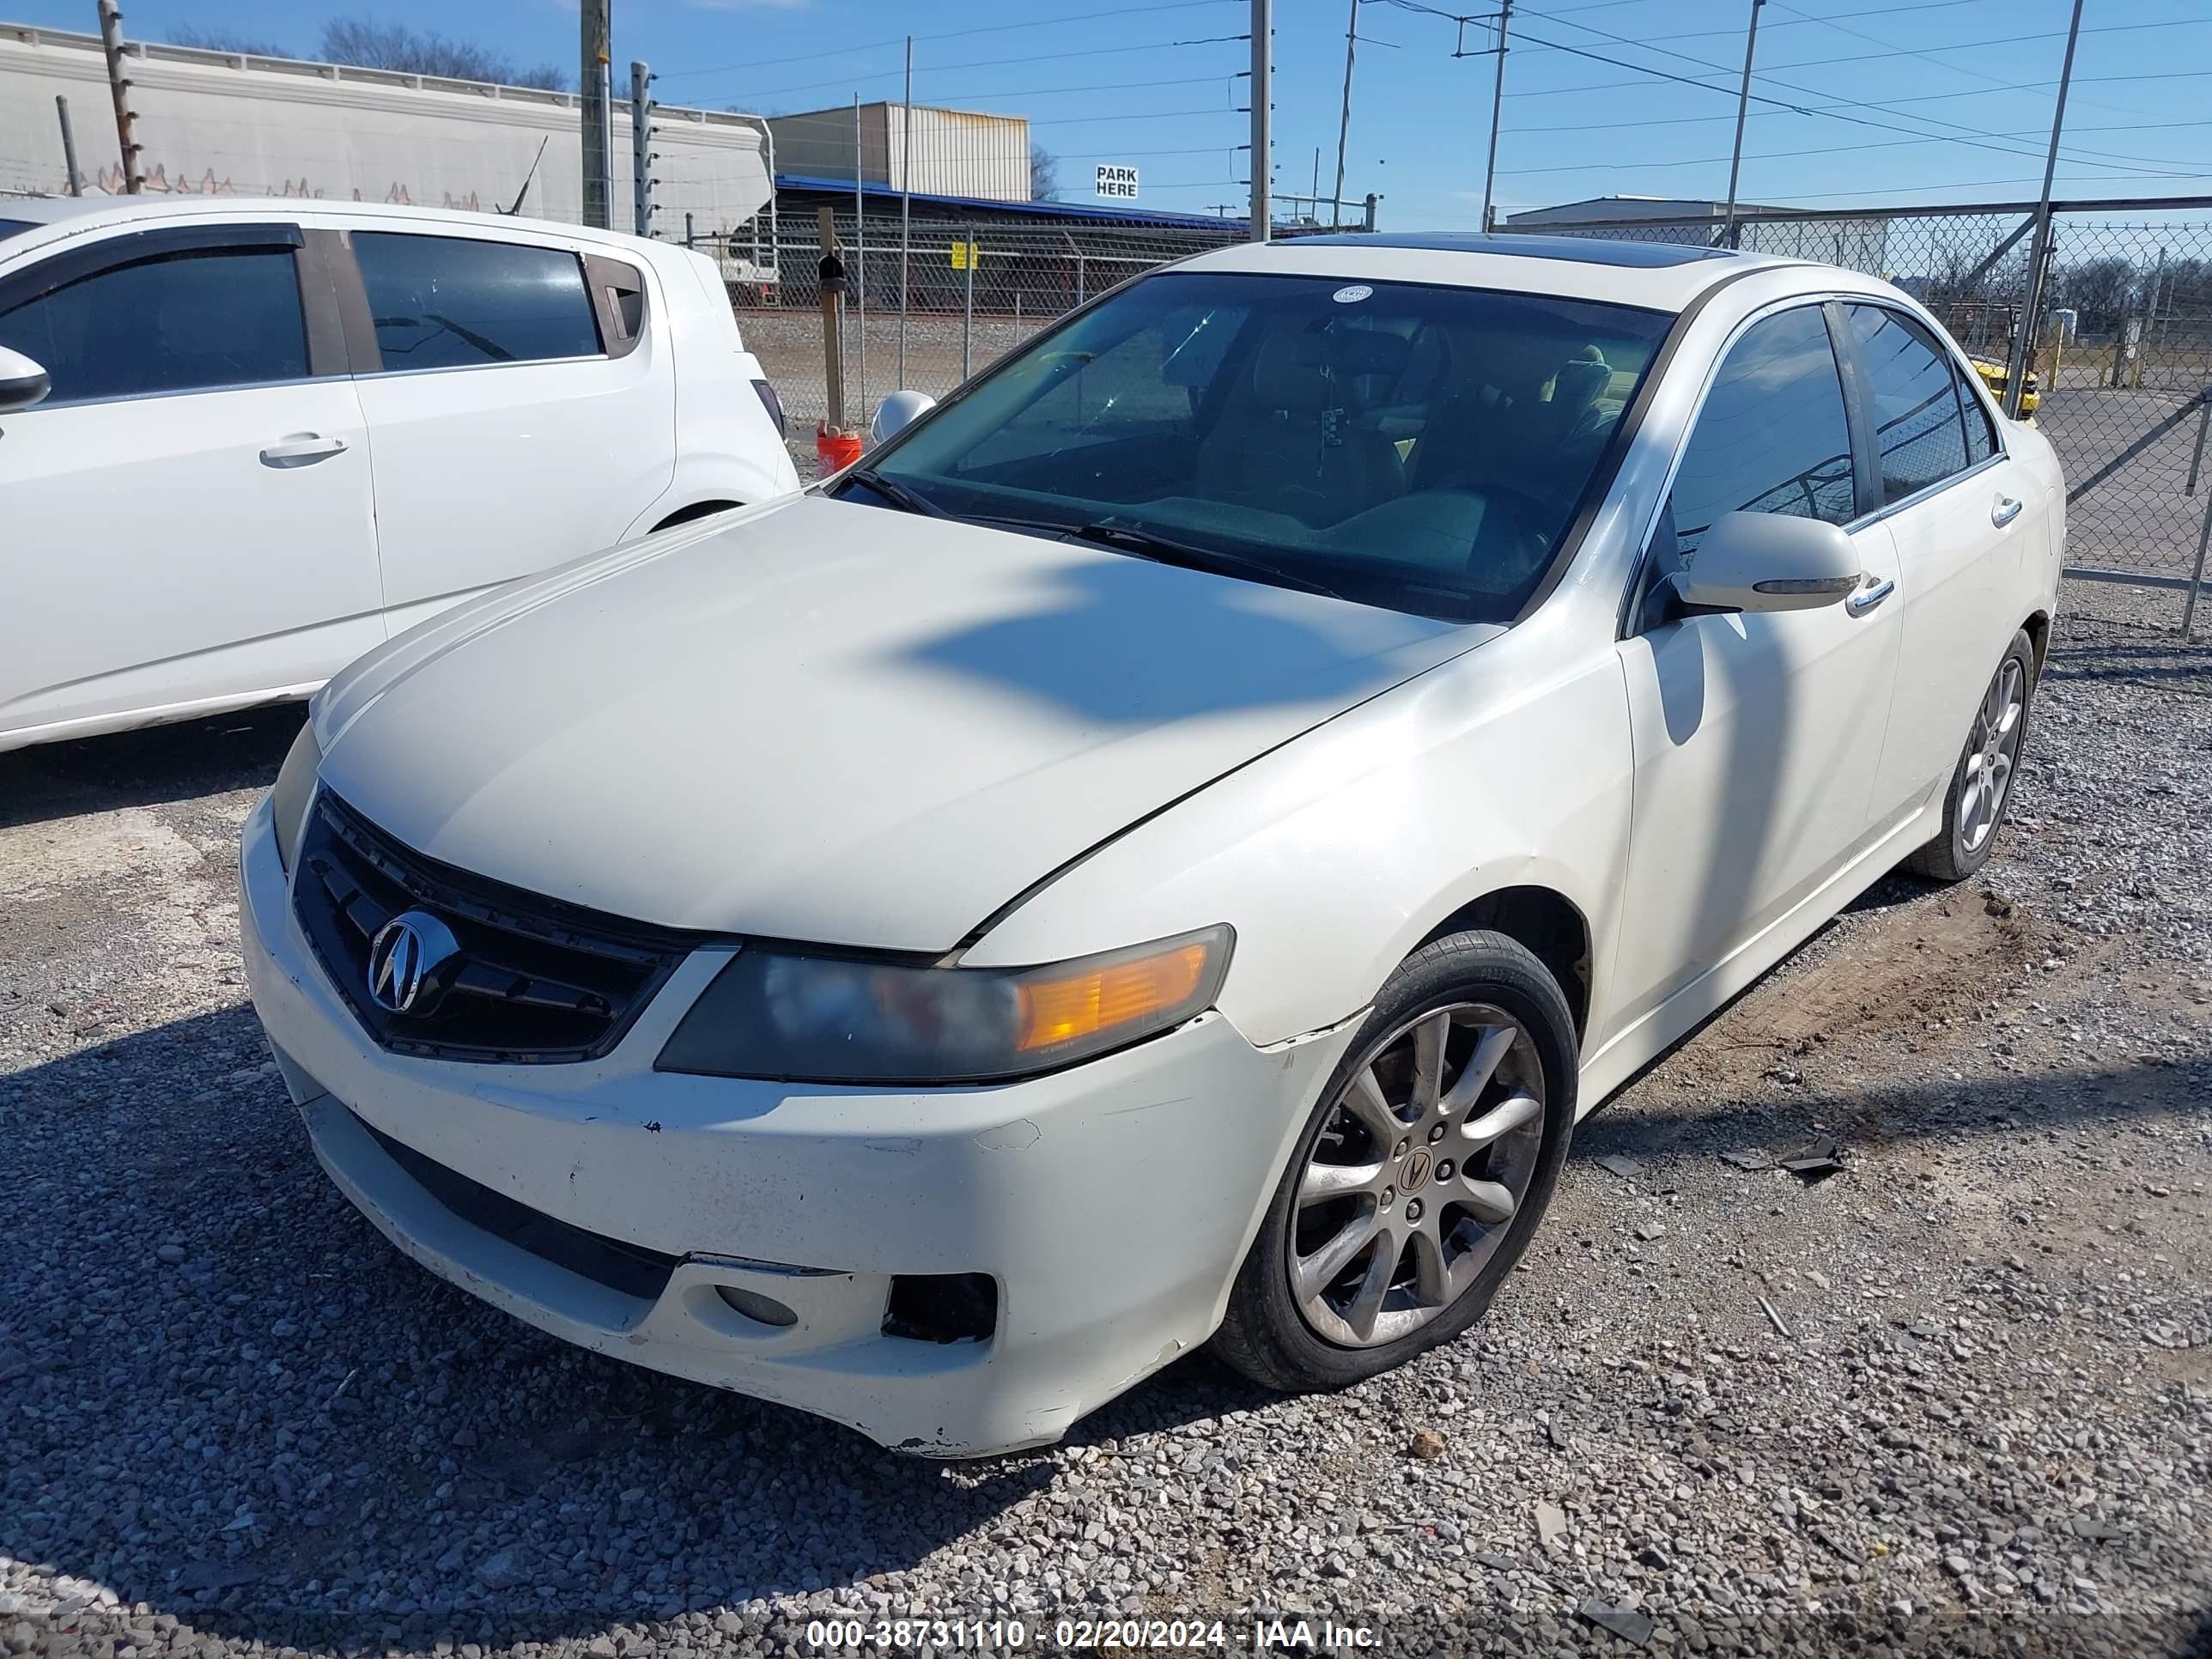 JH4CL96958C020929  - ACURA TSX  2008 IMG - 5